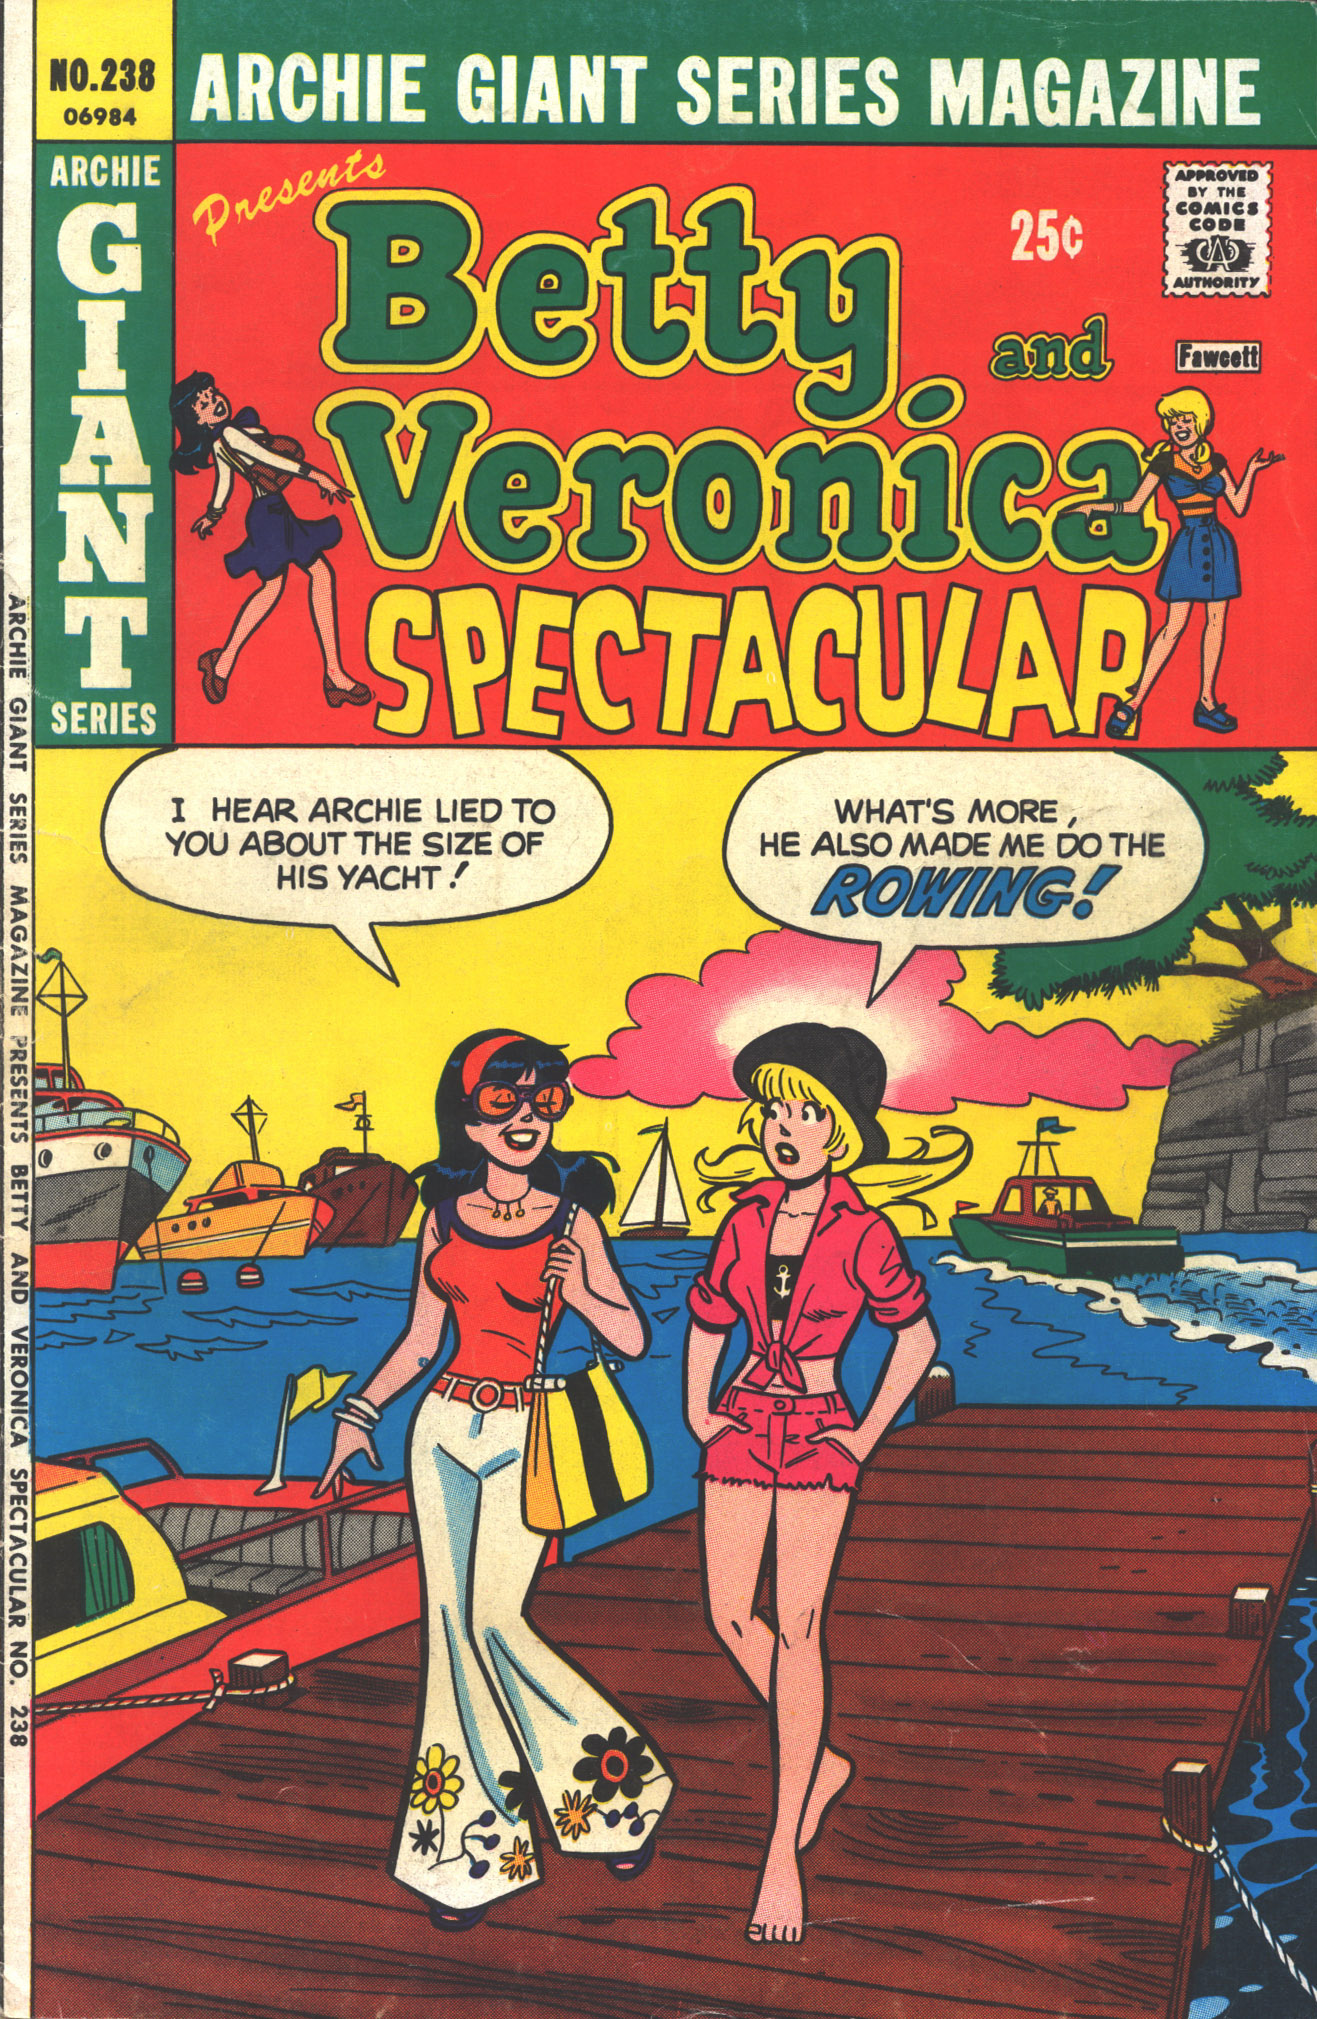 Read online Archie Giant Series Magazine comic -  Issue #238 - 1